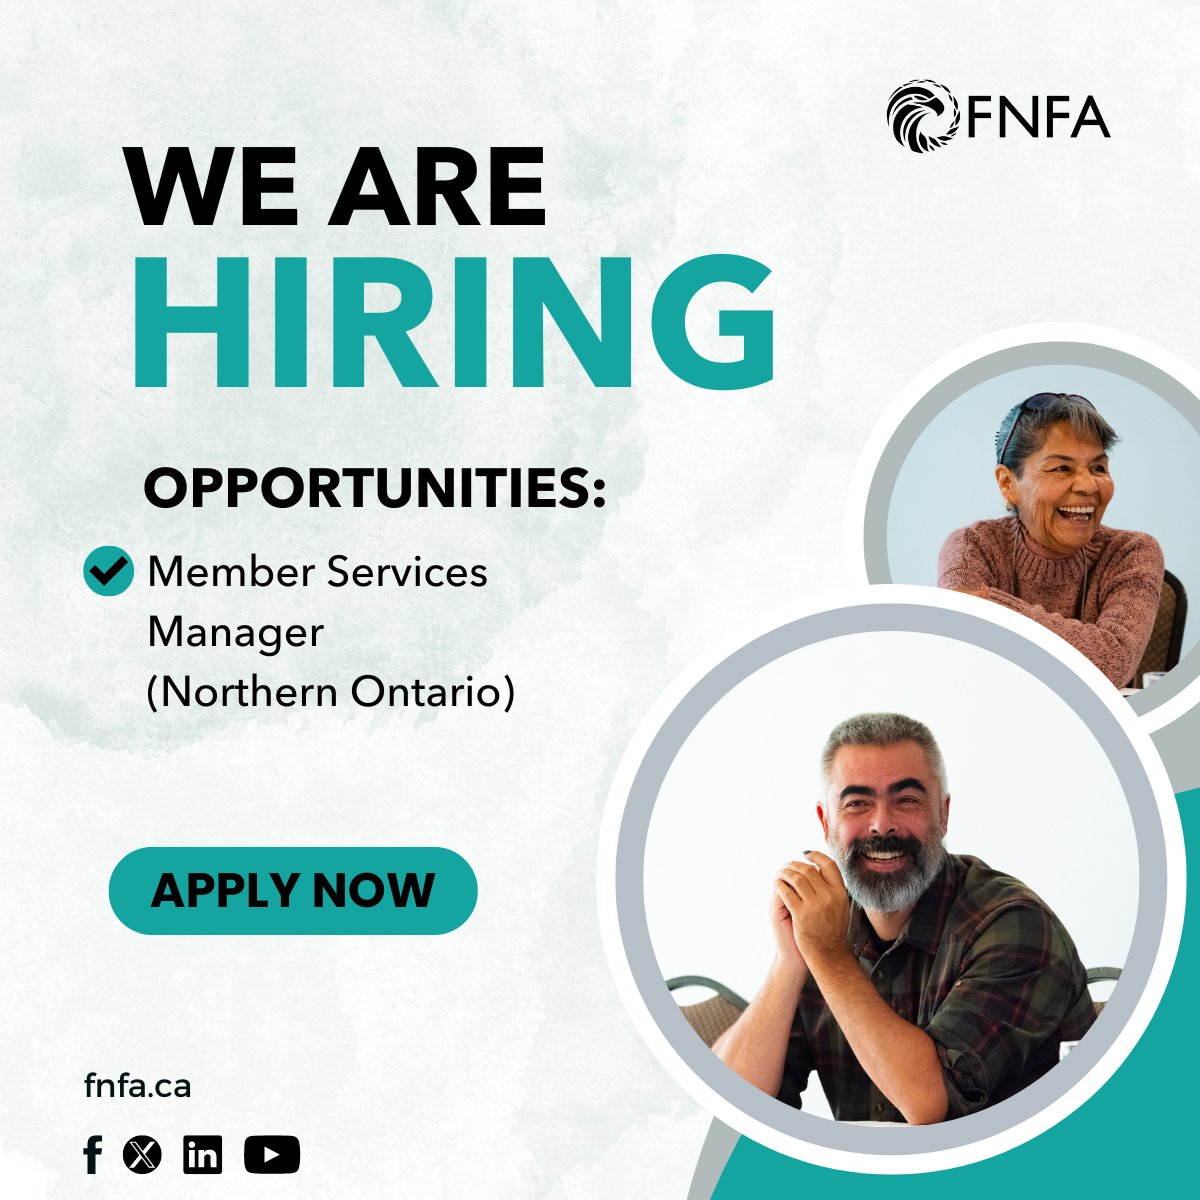 We are hiring: Join the FNFA Team today! Apply now and help unlock a brighter future! 🔗 fnfa.ca/en/opportuniti… 
#FNFA #StrongerTogether #Hiring #Jobs #IndigenousEconomy